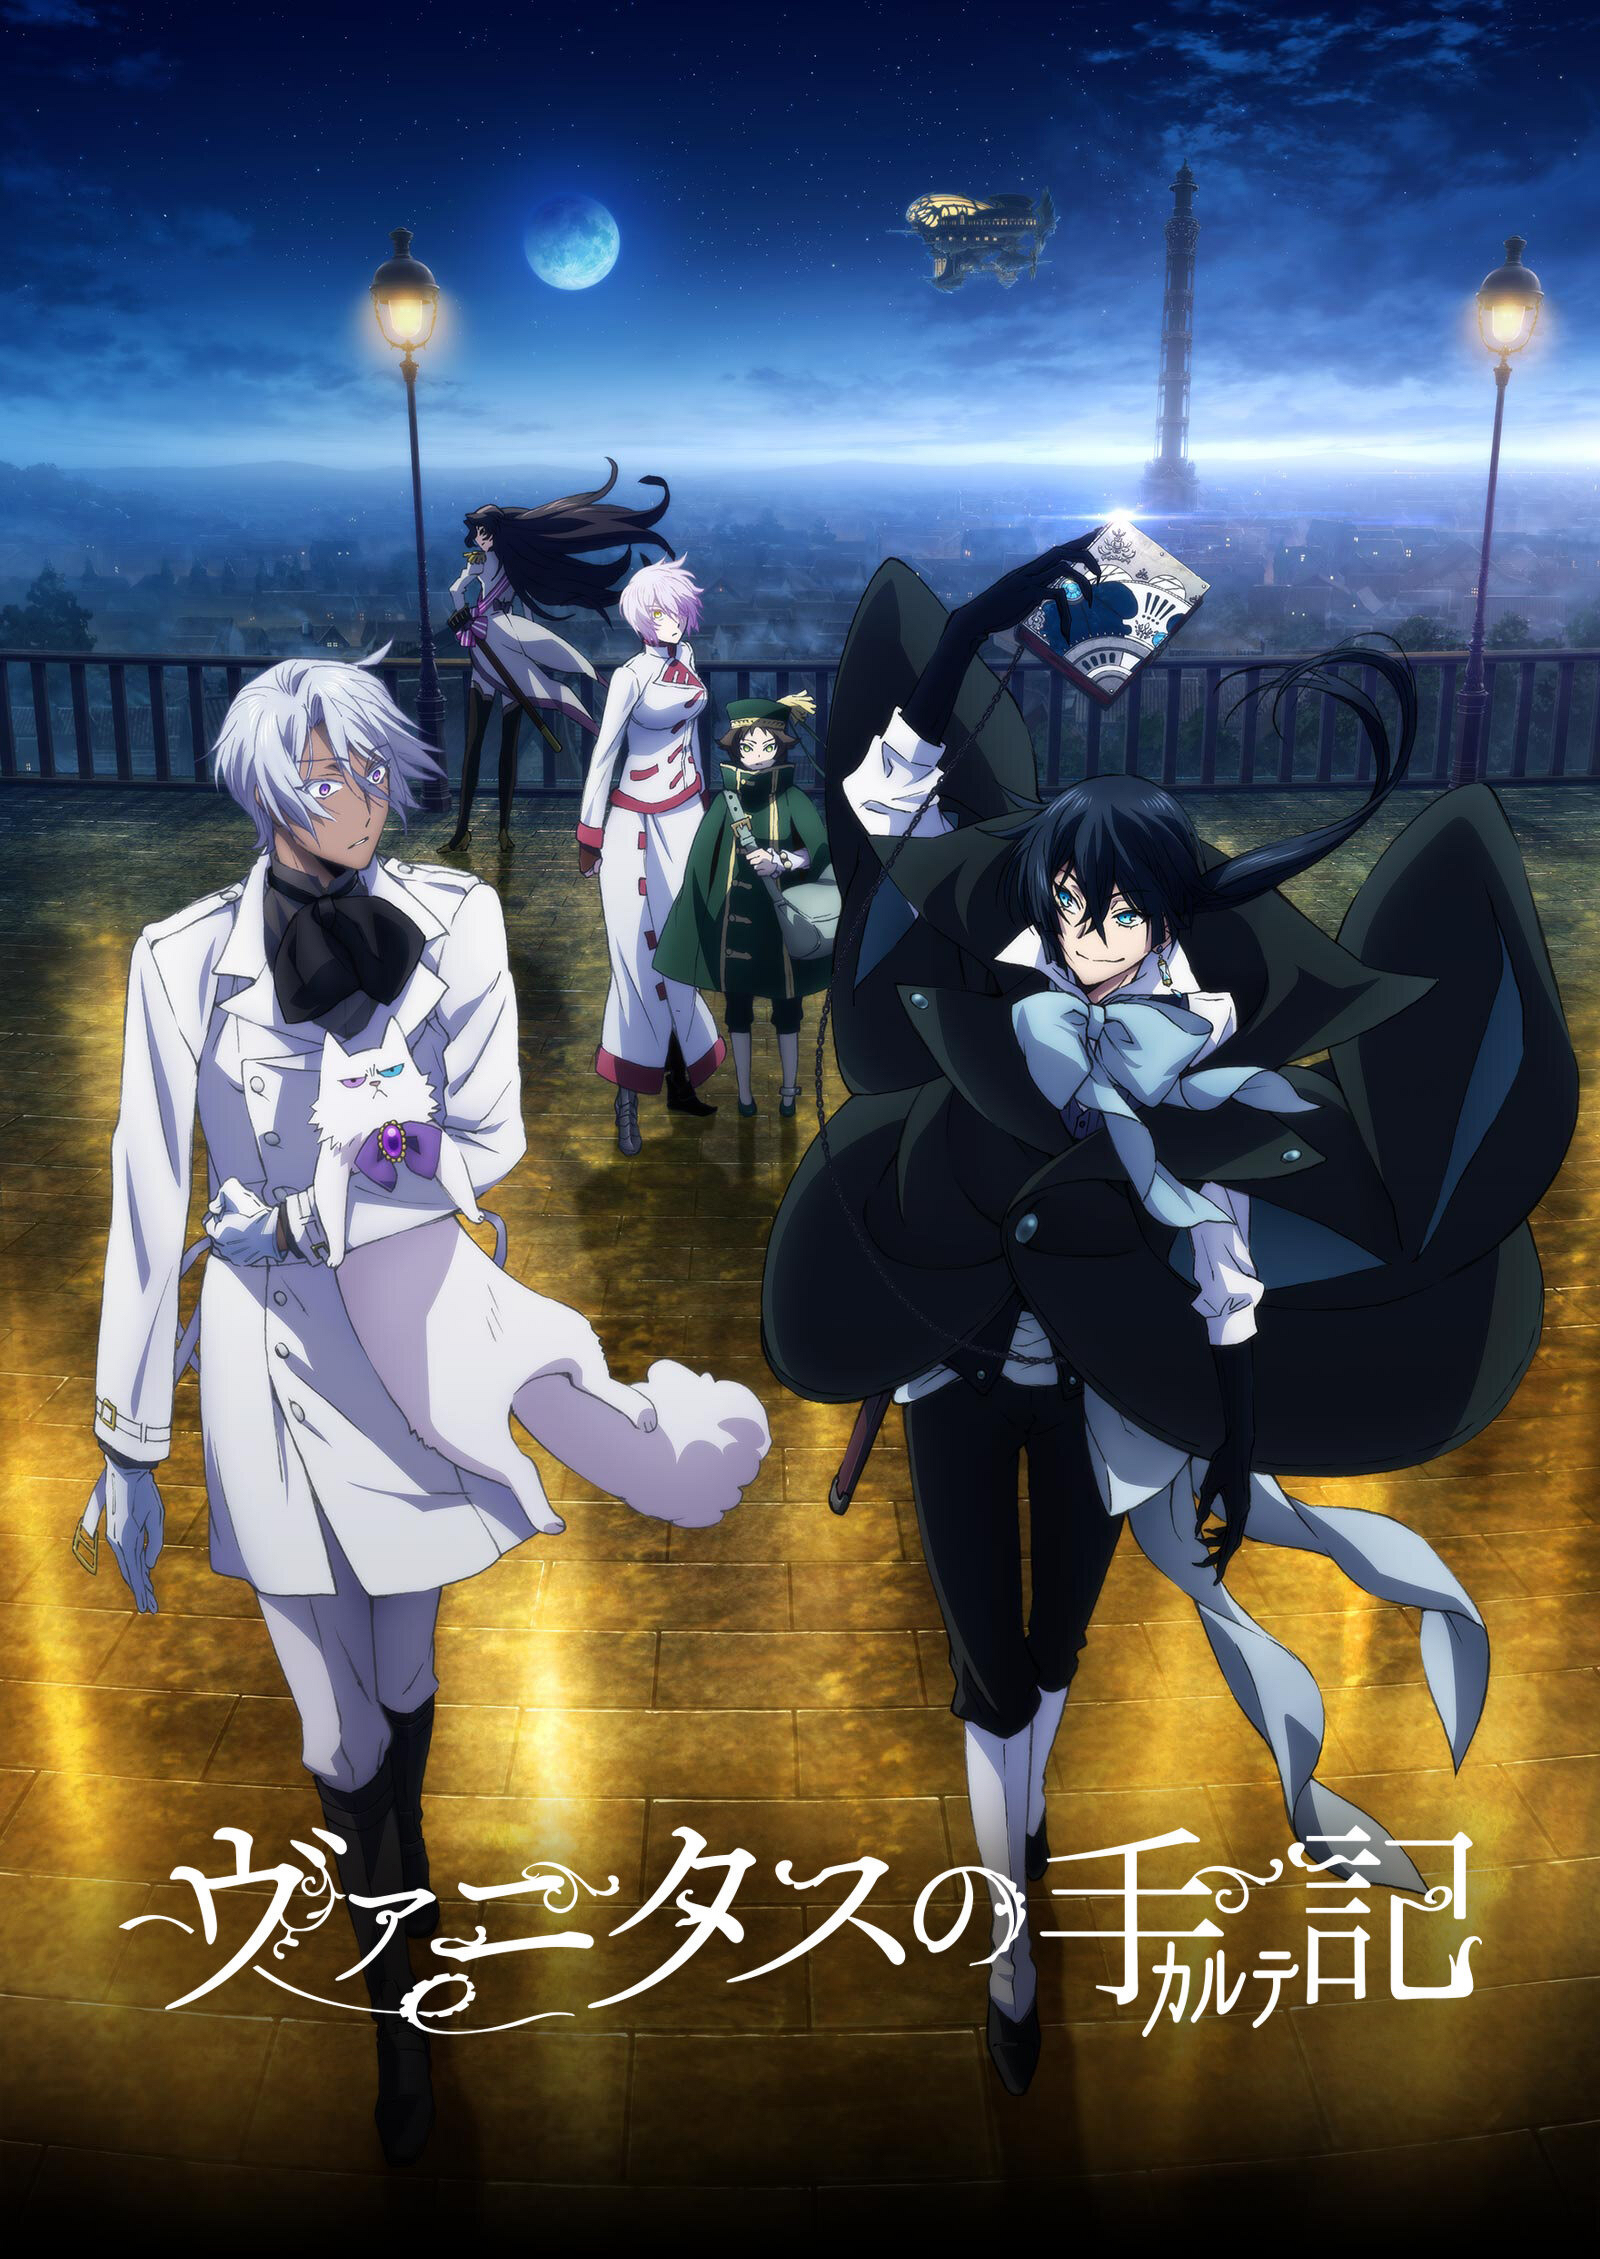 Aniplex Gives Glimpse Into Vampire Nobility in The Case Study of